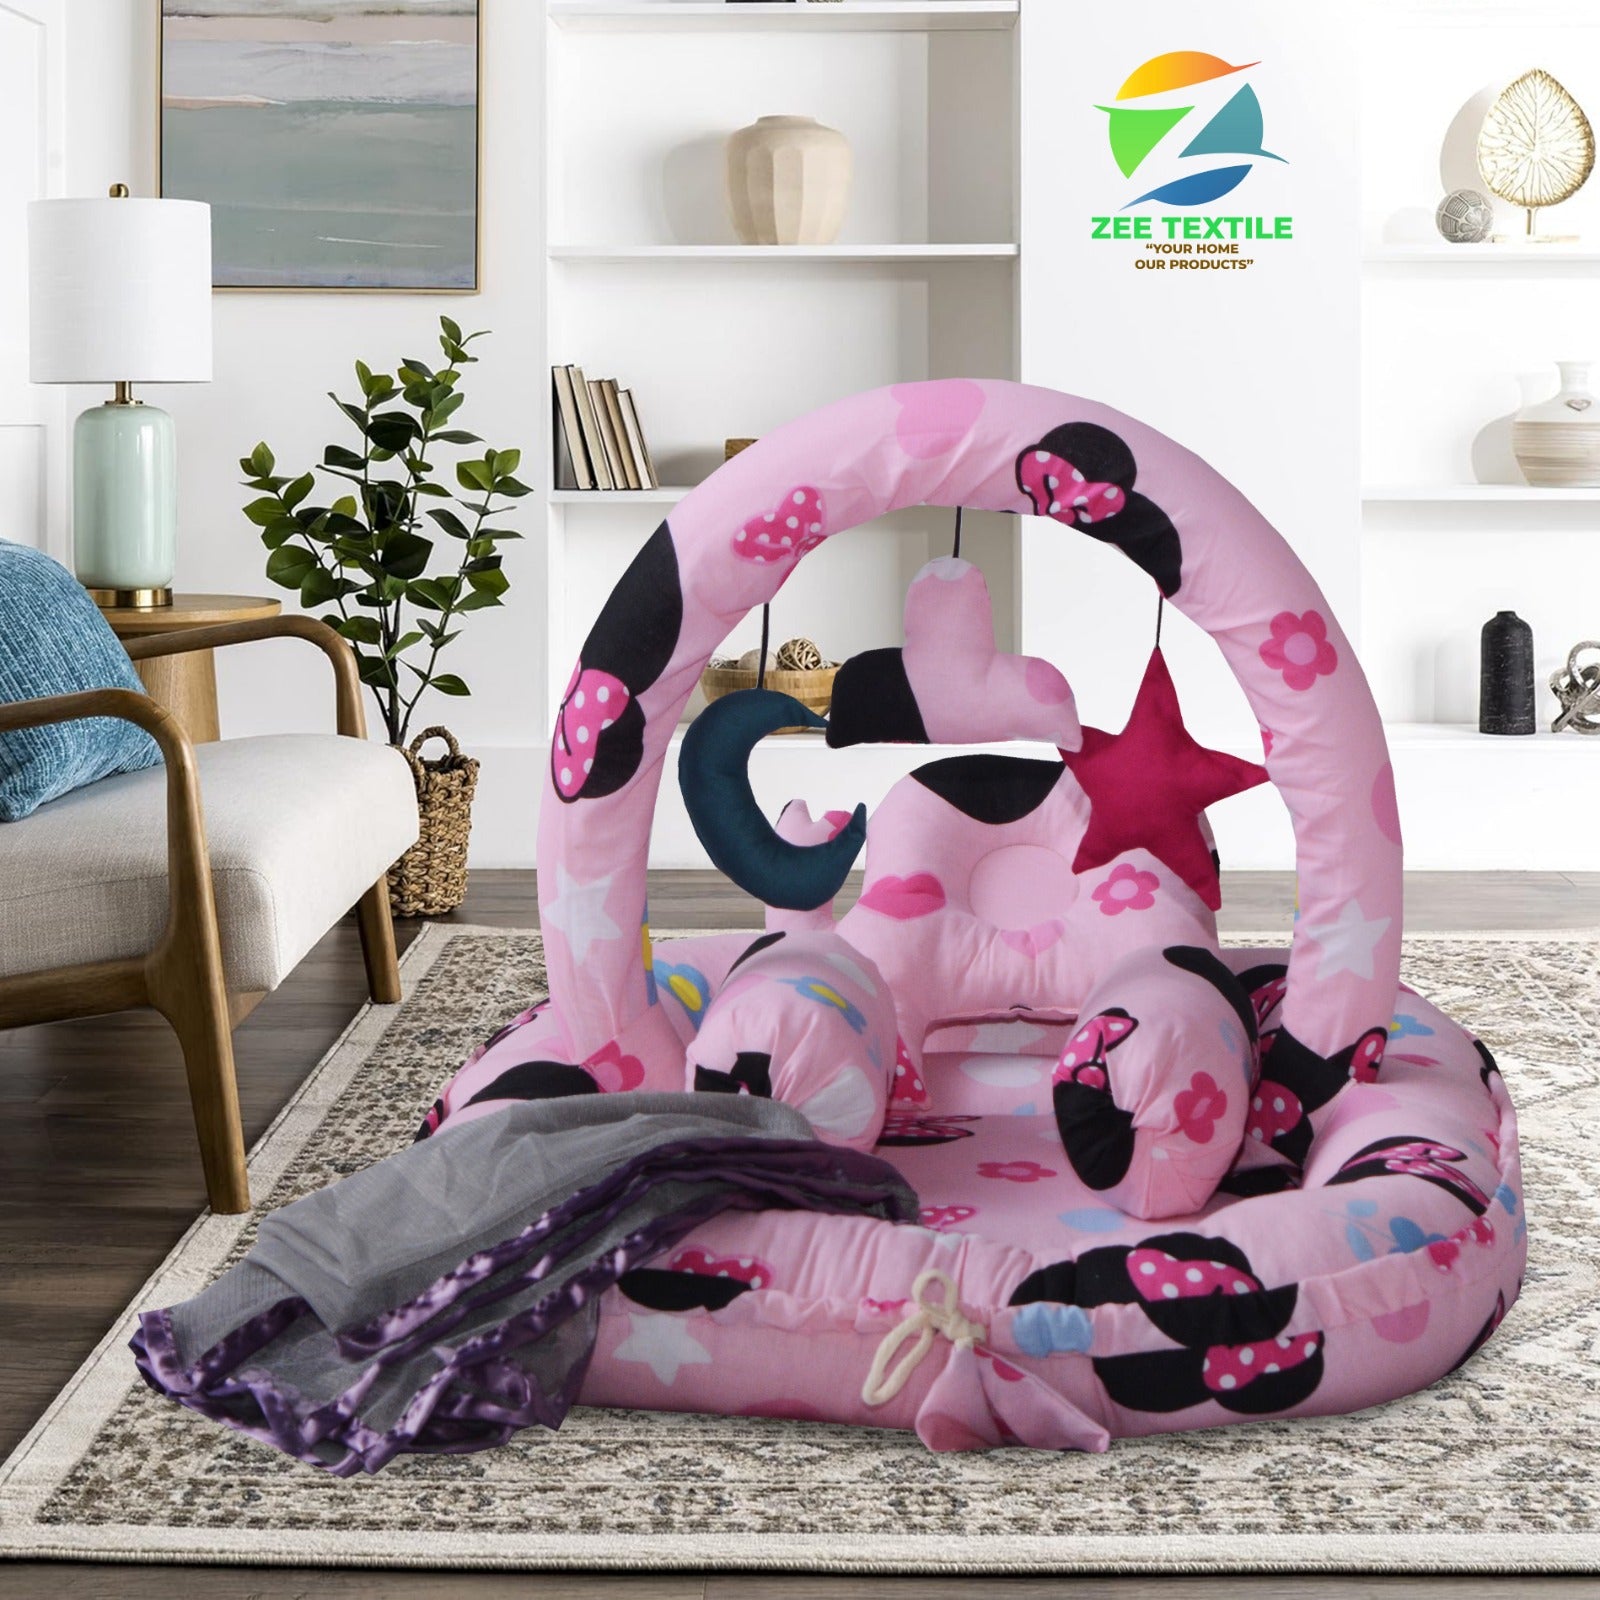 Printed Baby Nest with snuggle & Mosquito Net-5 pcs-Pink